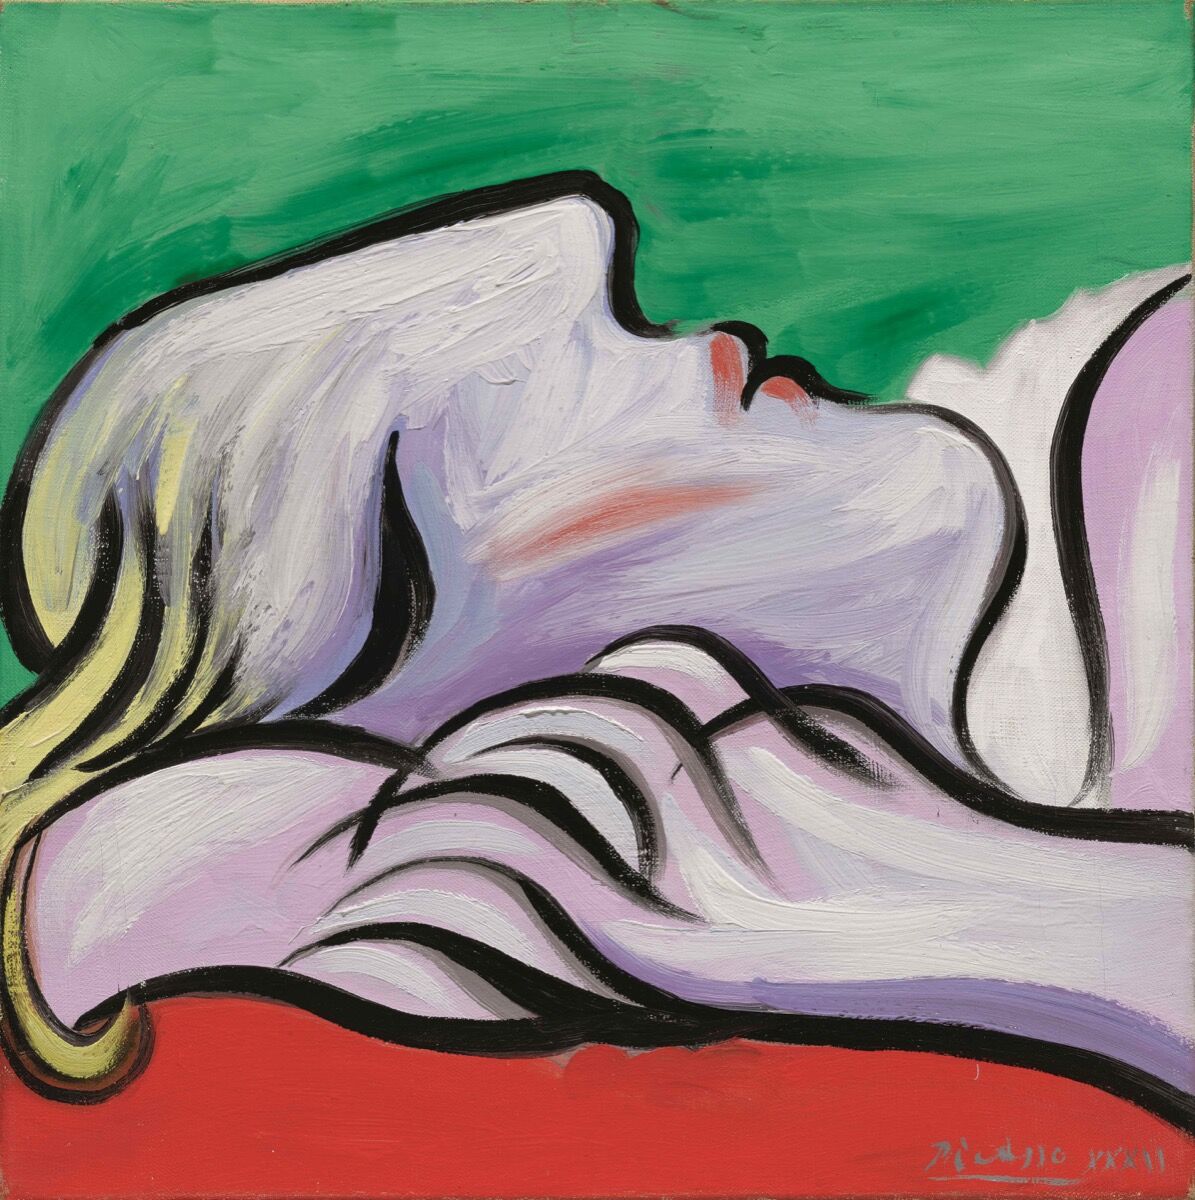 Pablo Picasso, Le repos, 1932. Courtesy of Sotheby’s.